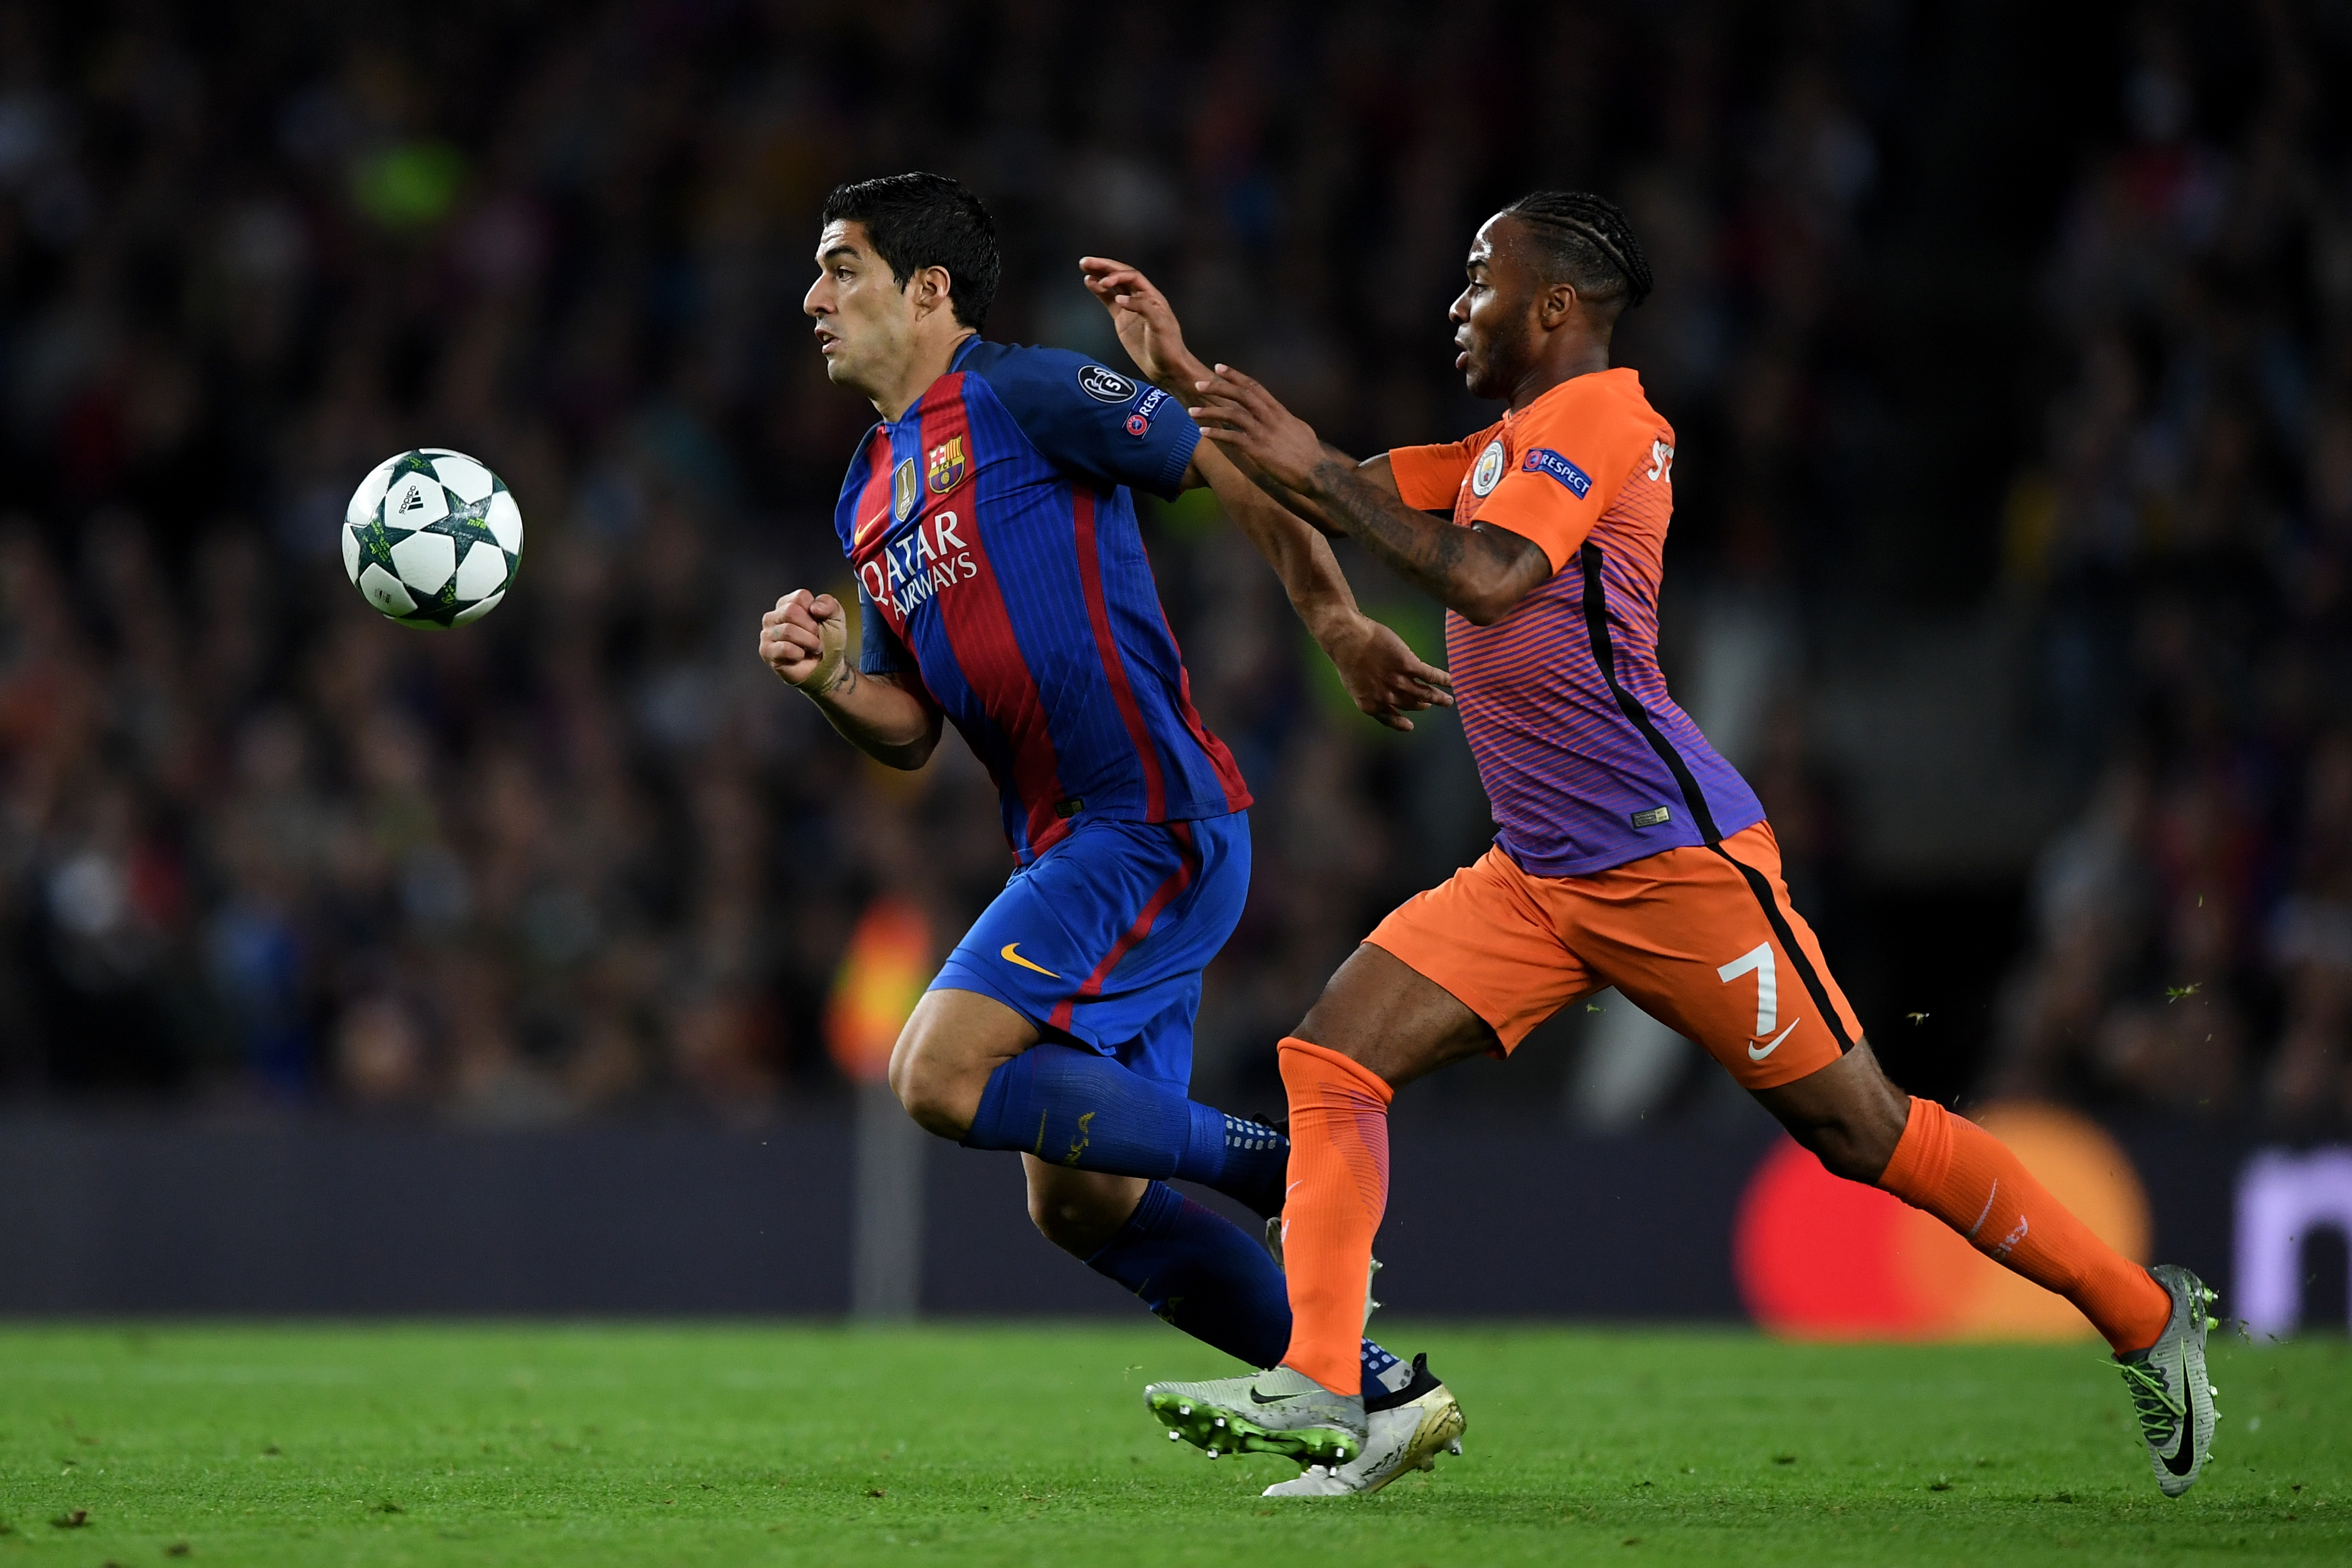 BARCELONA, SPAIN - OCTOBER 19: Neymar of Barcelona holds off pressure from Raheem Sterling of Manchester City during the UEFA Champions League group C match between FC Barcelona and Manchester City FC at Camp Nou on October 19, 2016 in Barcelona, Spain.  (Photo by Shaun Botterill/Getty Images)